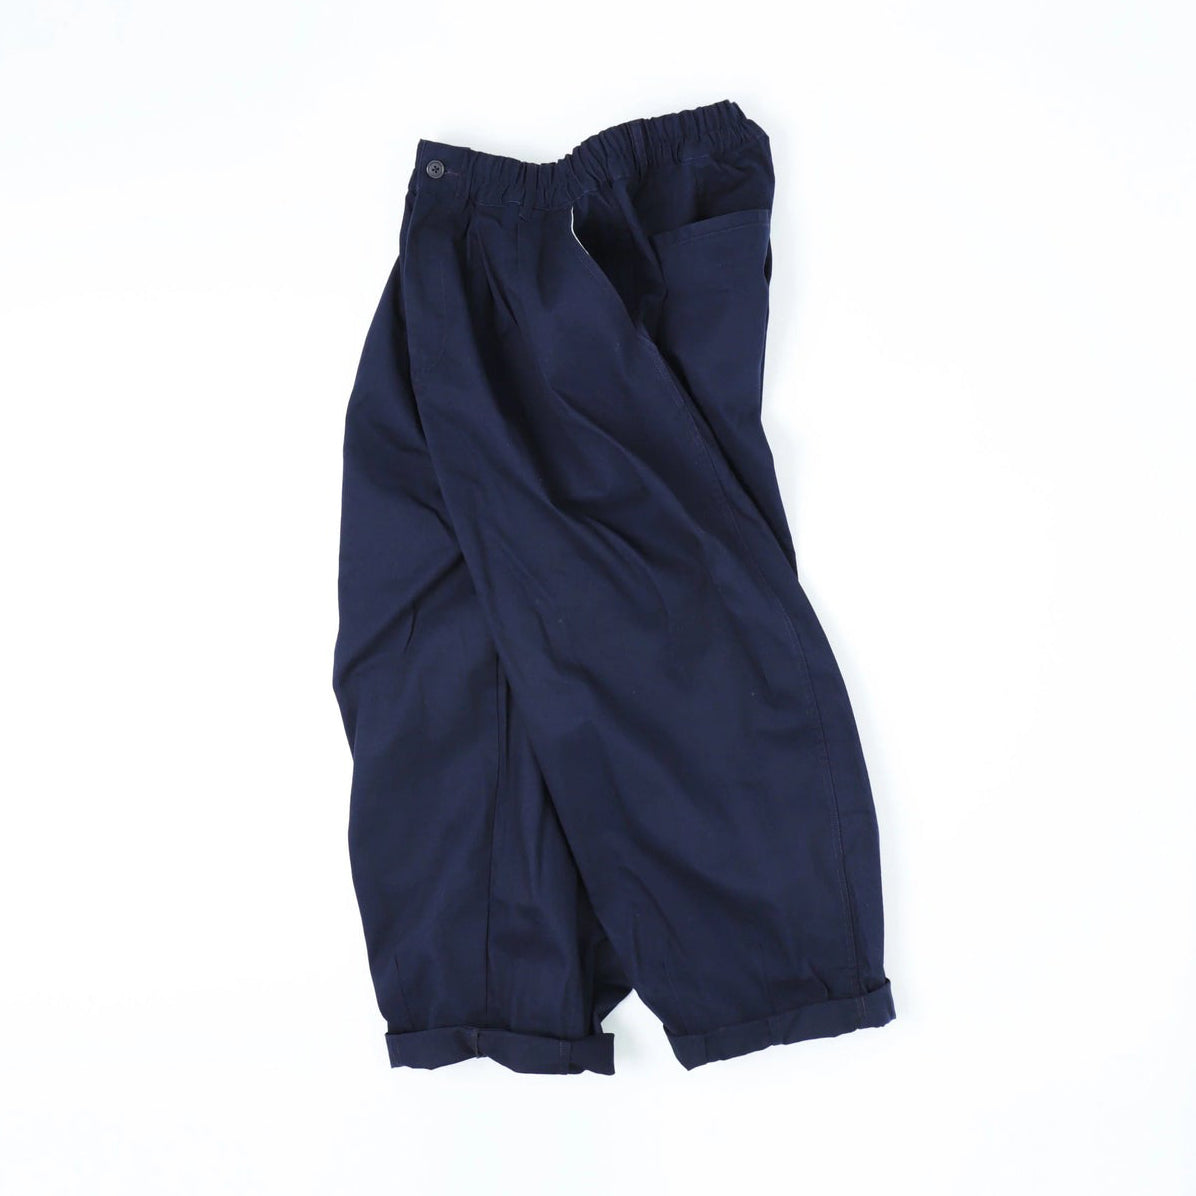 No:#590 | Name:FW23-BIG UNISEX BALLOON PANTS | Color:Navy| Size:Free【WORKWARE】【入荷予定アイテム・入荷連絡可能】